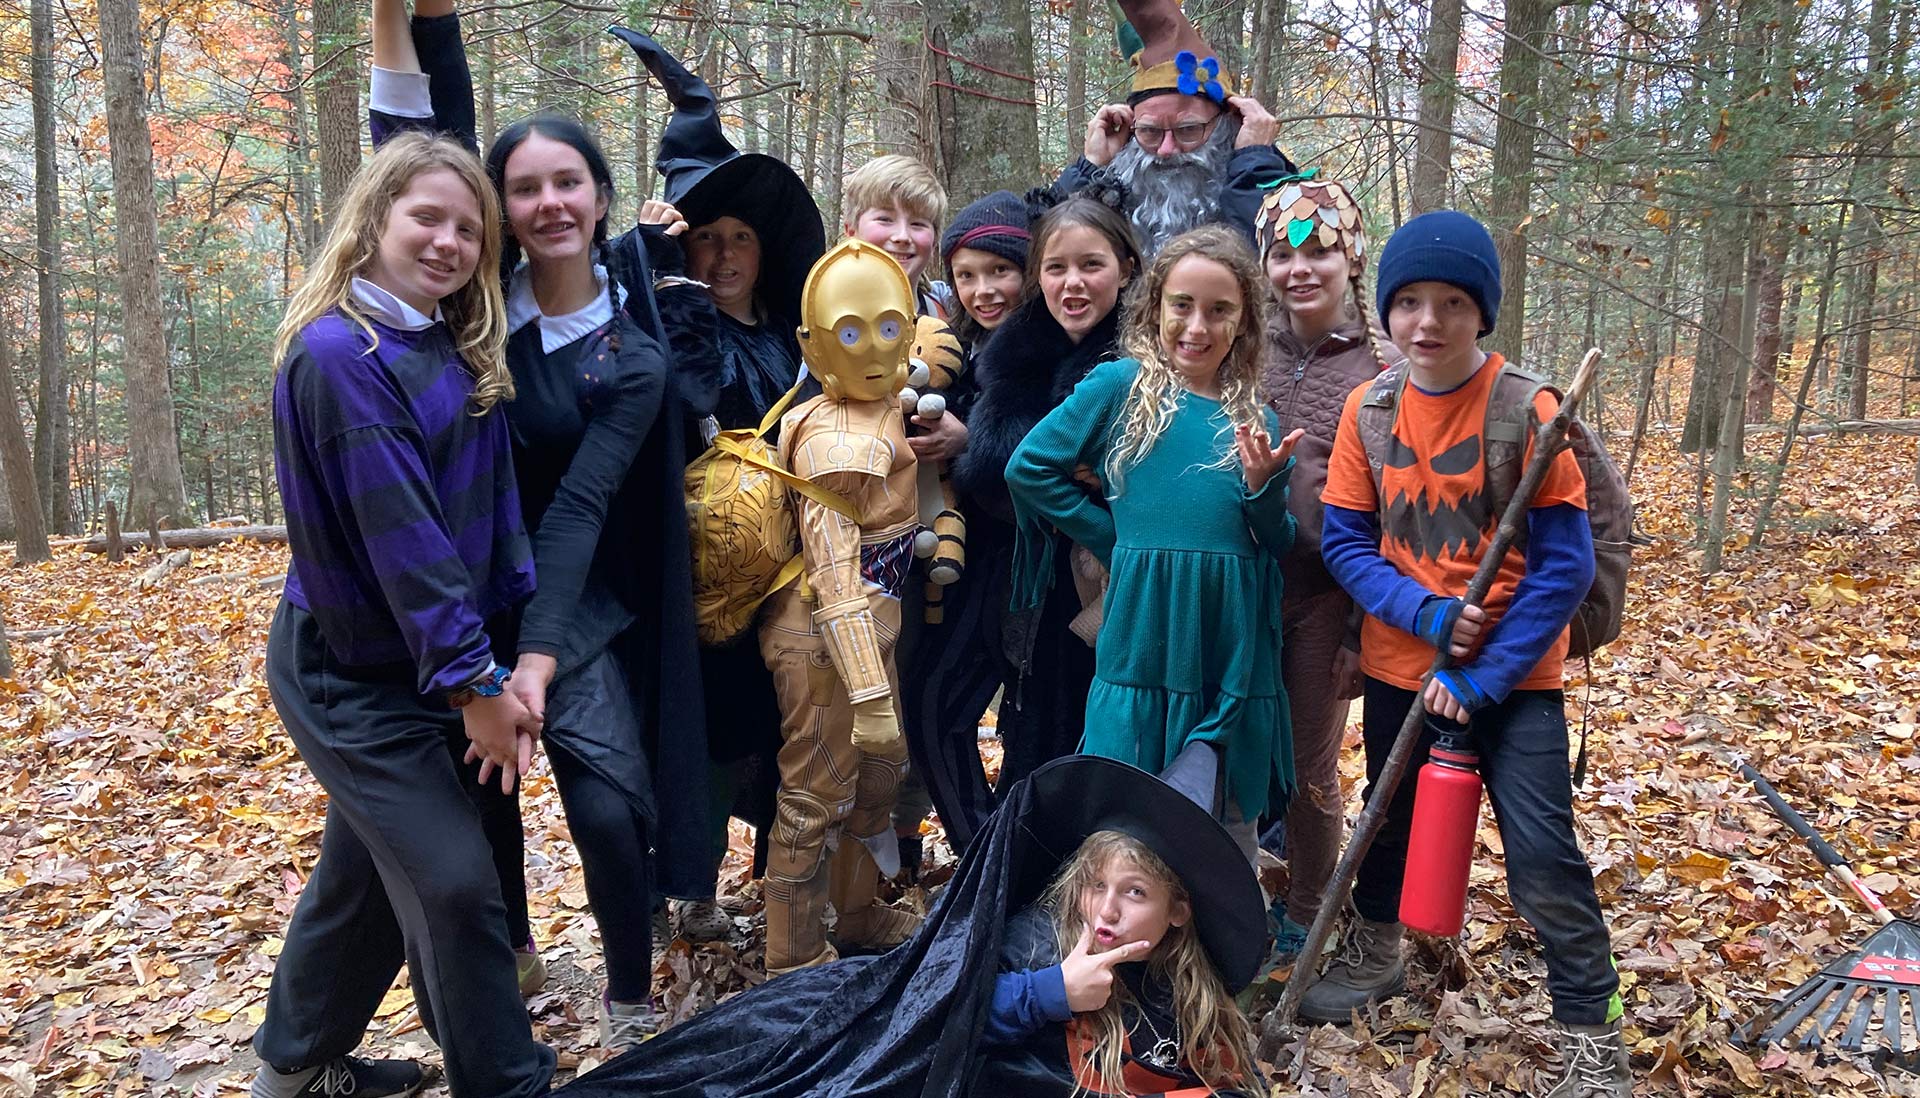 Homeschool kids dressed up in costume for a day at forest school program